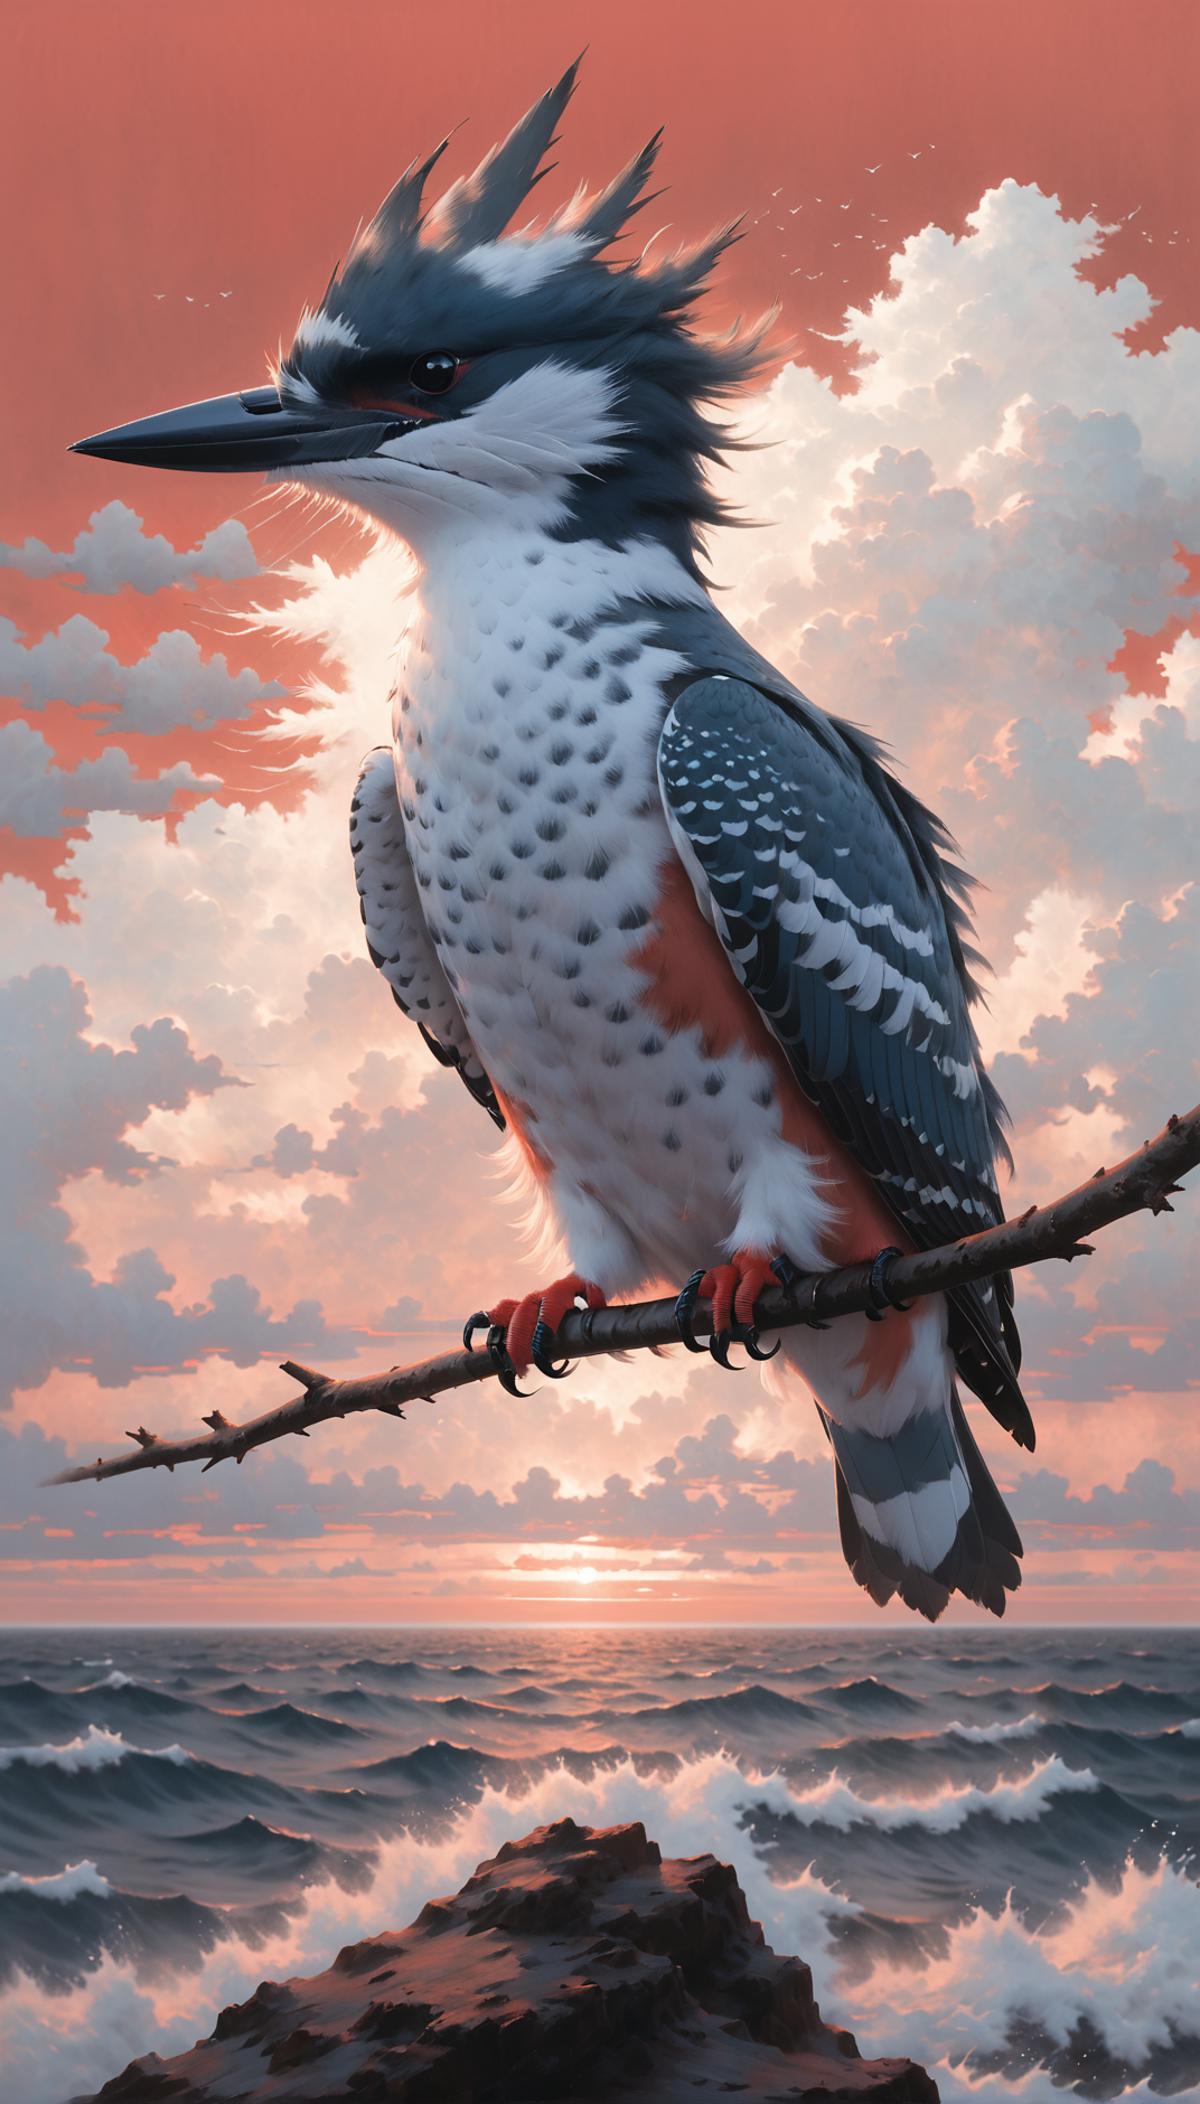 A Bird With Pink, Blue, White, and Black Feathers Perched on a Branch with the Sunset in the Background.